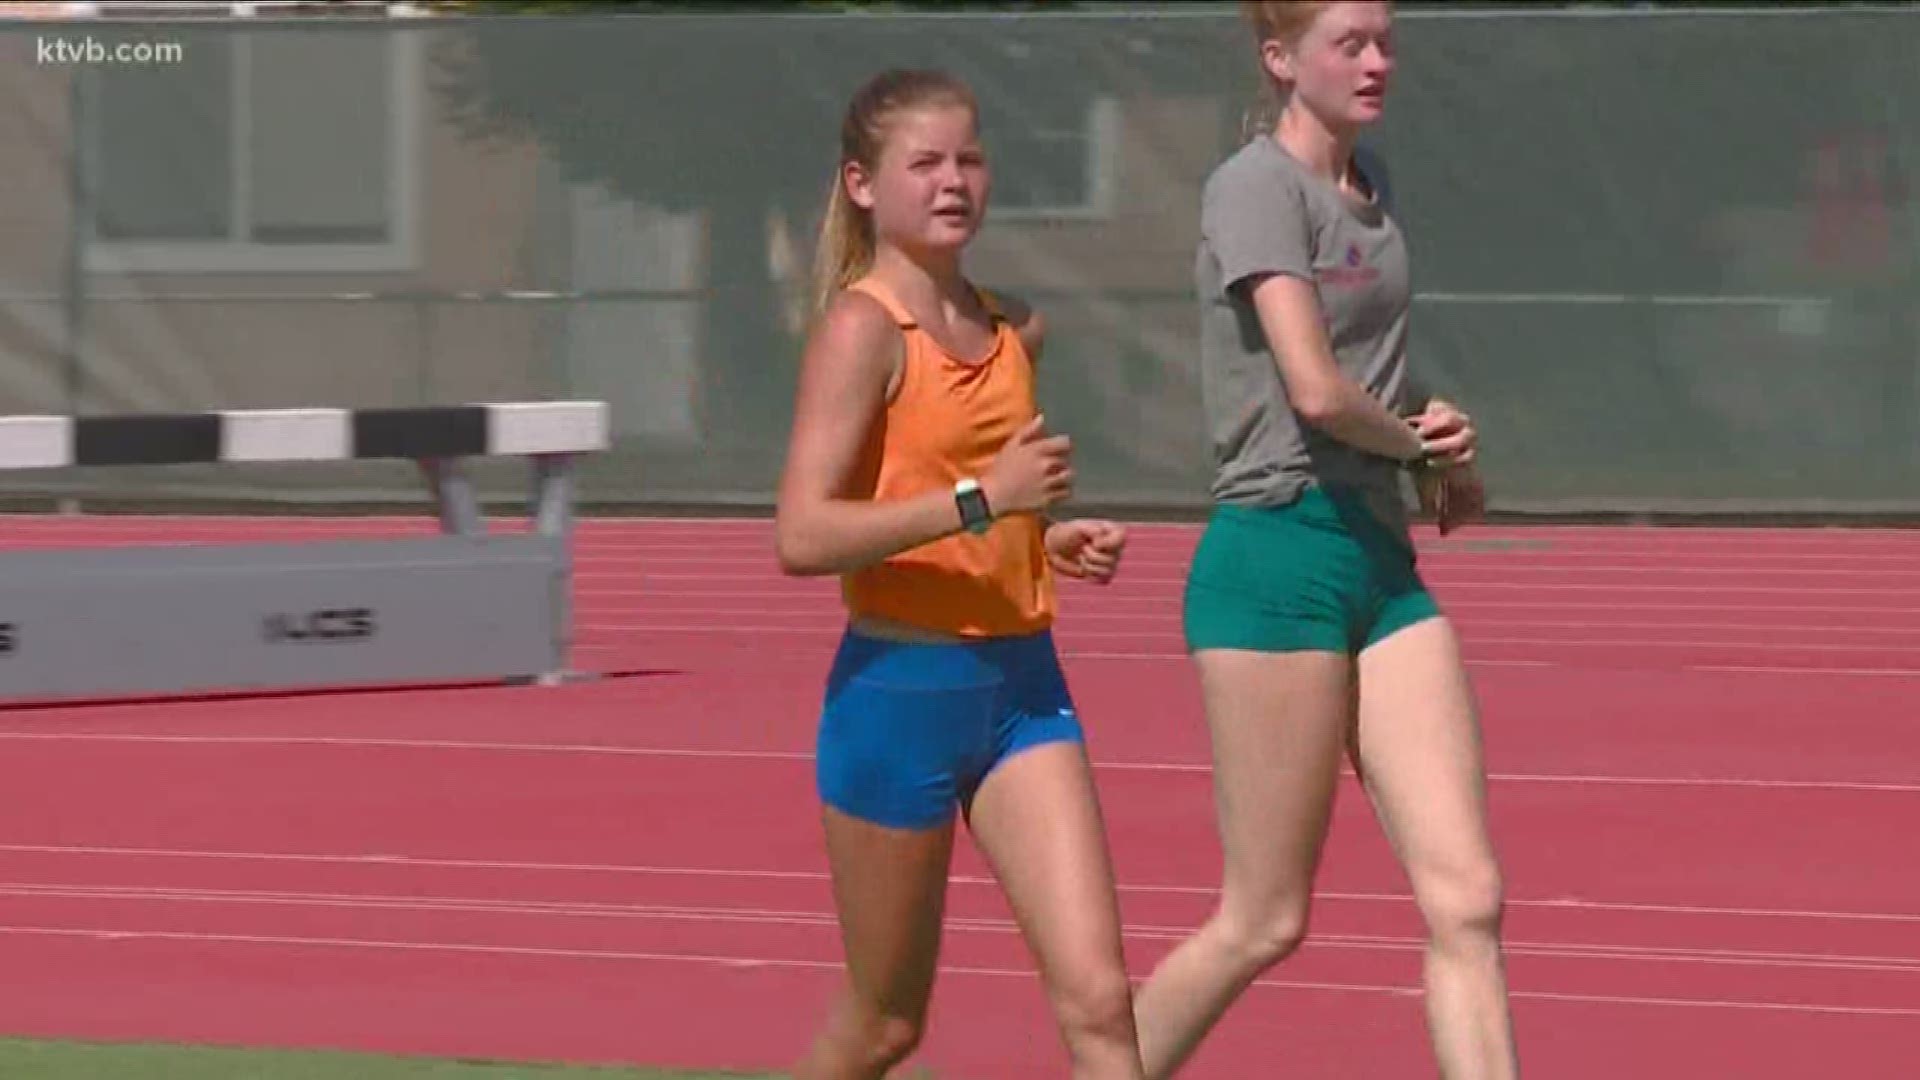 The Boise State junior, Allie Ostrander, could itch her name in NCAA track and field history this weekend in Austin, Texas. She has the chance to win her third straight steeplechase national title. Only one other has won it three times, but no has won three straight.